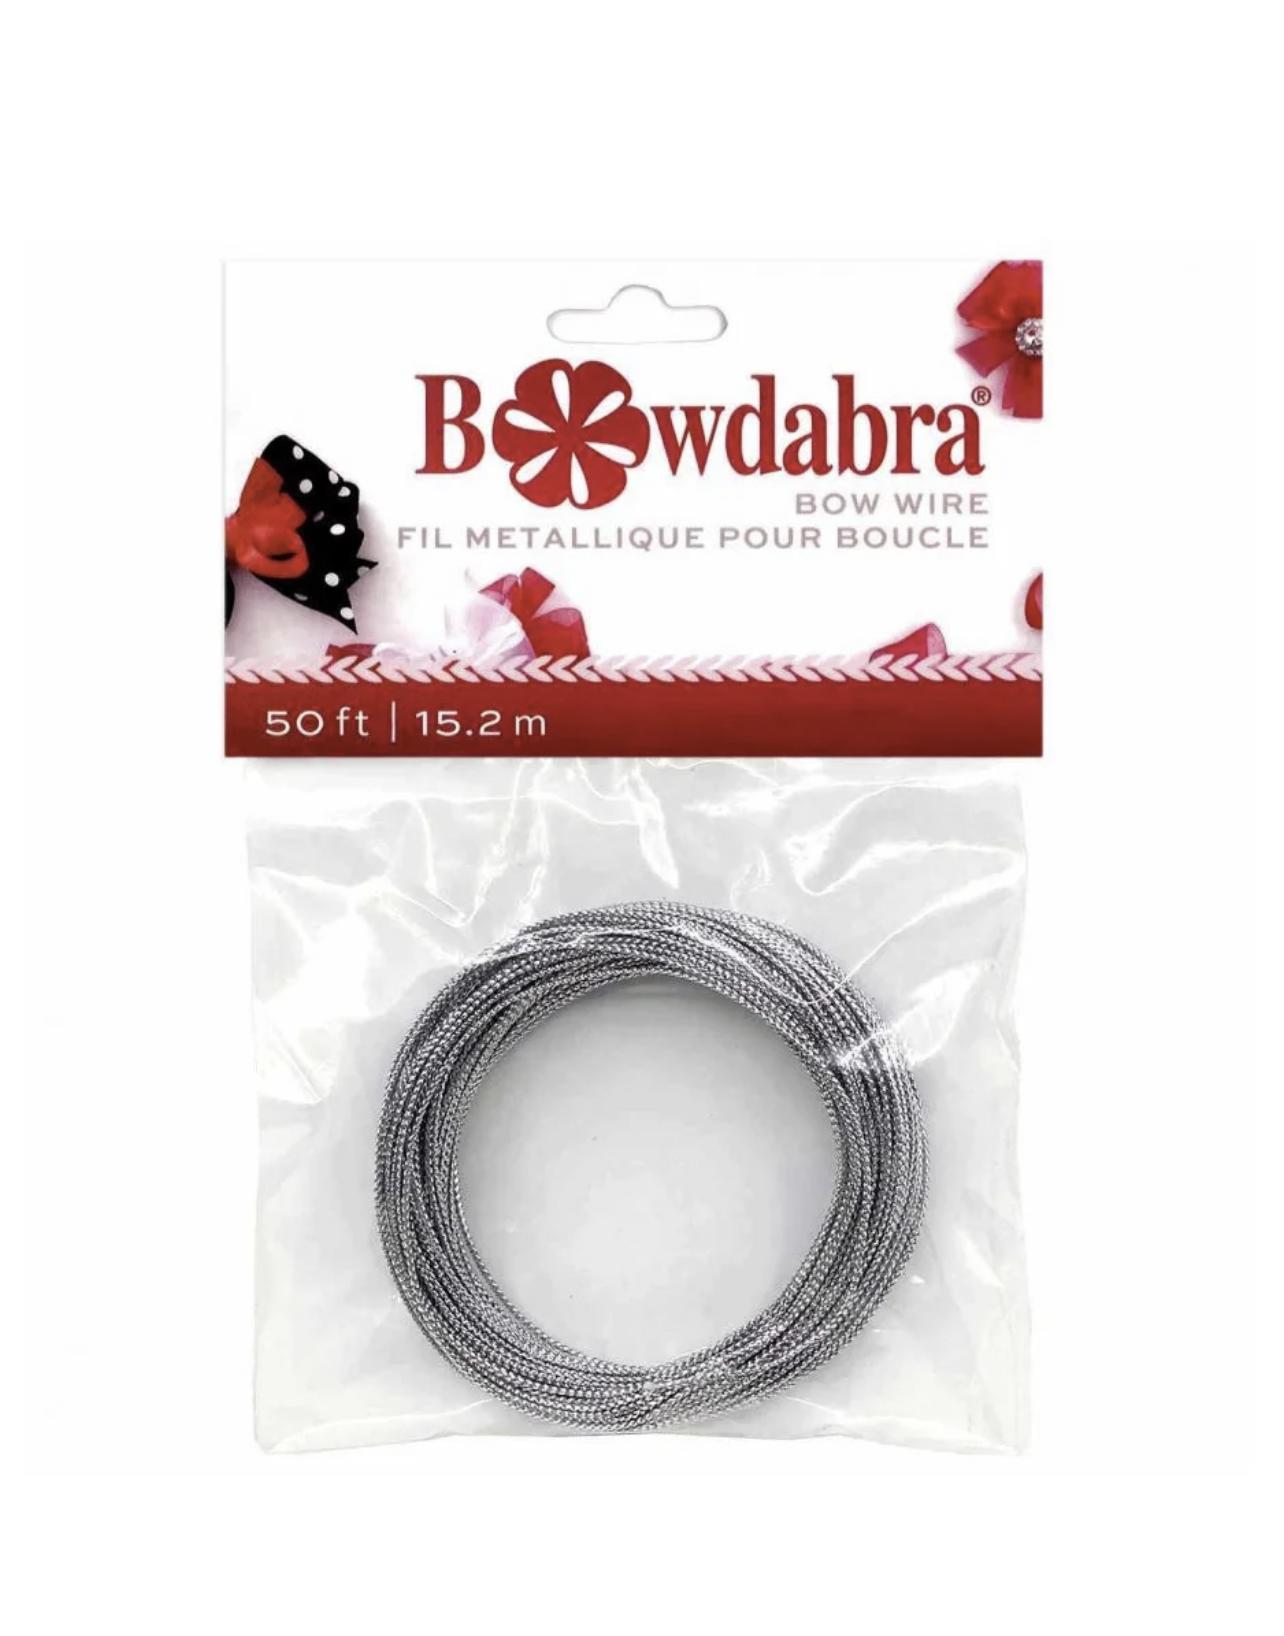 Bowdabra Bow Maker Wire (50 Feet) - SILVER (BOW3040)